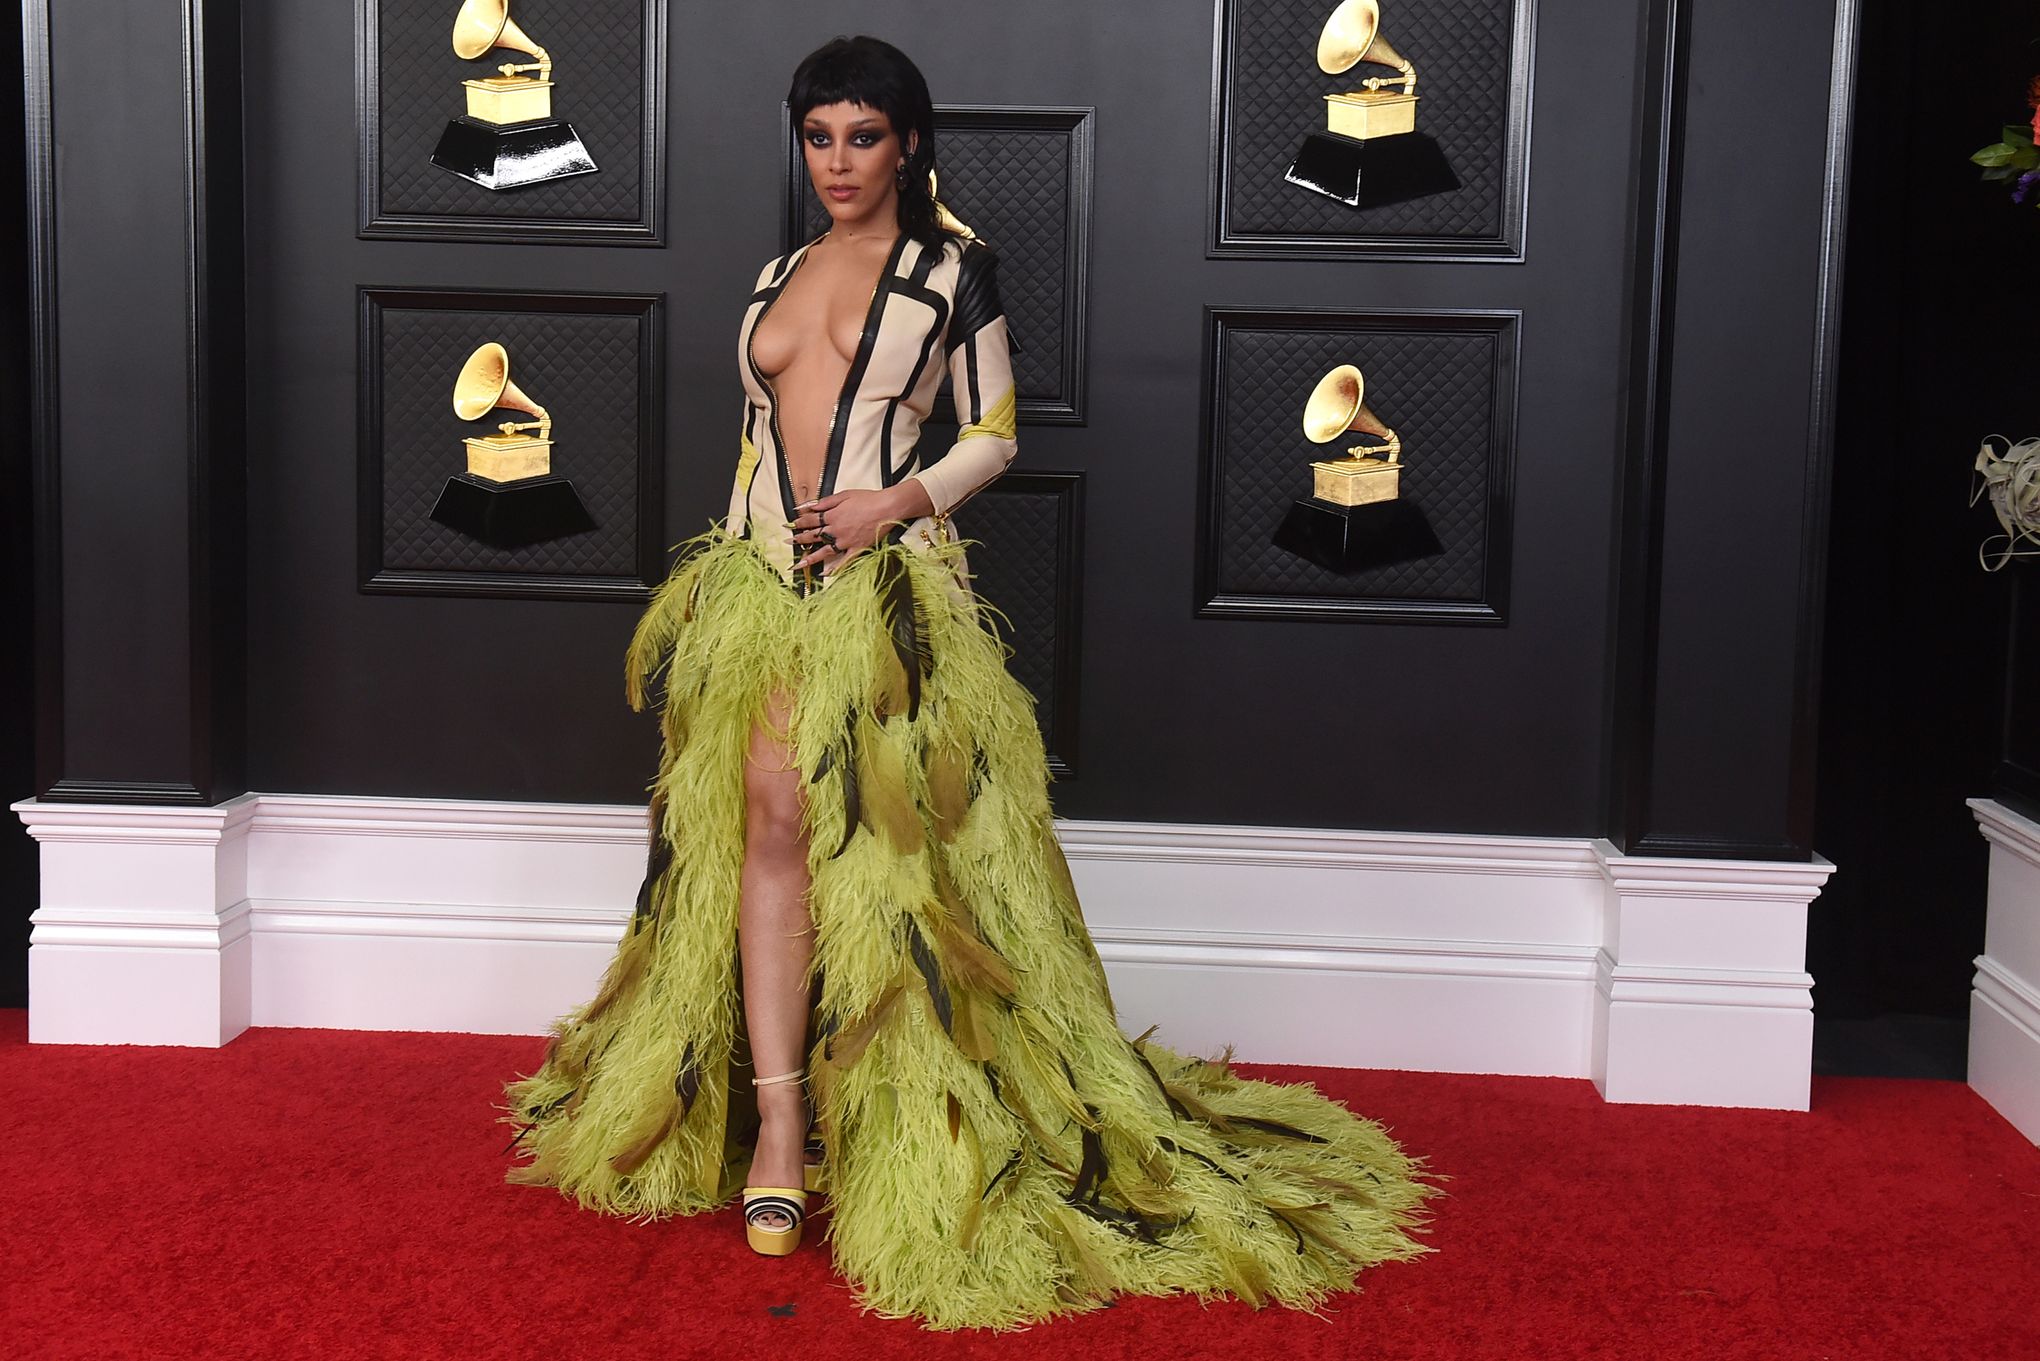 Dua Lipa Has a High-Fashion Moment in Versace at the 2021 Grammys